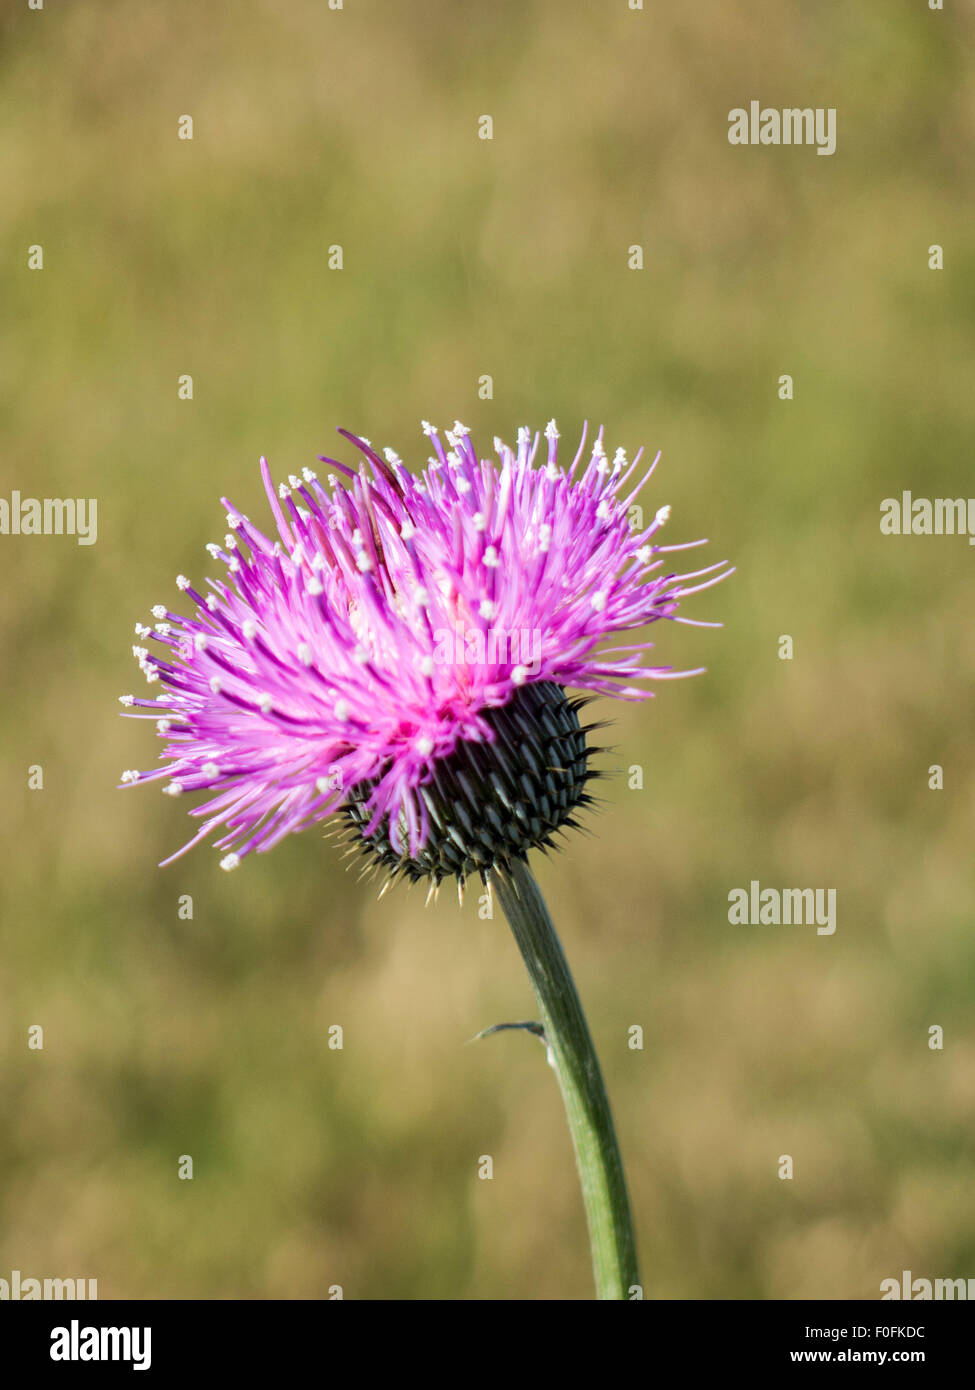 Thistle flower in Texas pasture Stock Photo